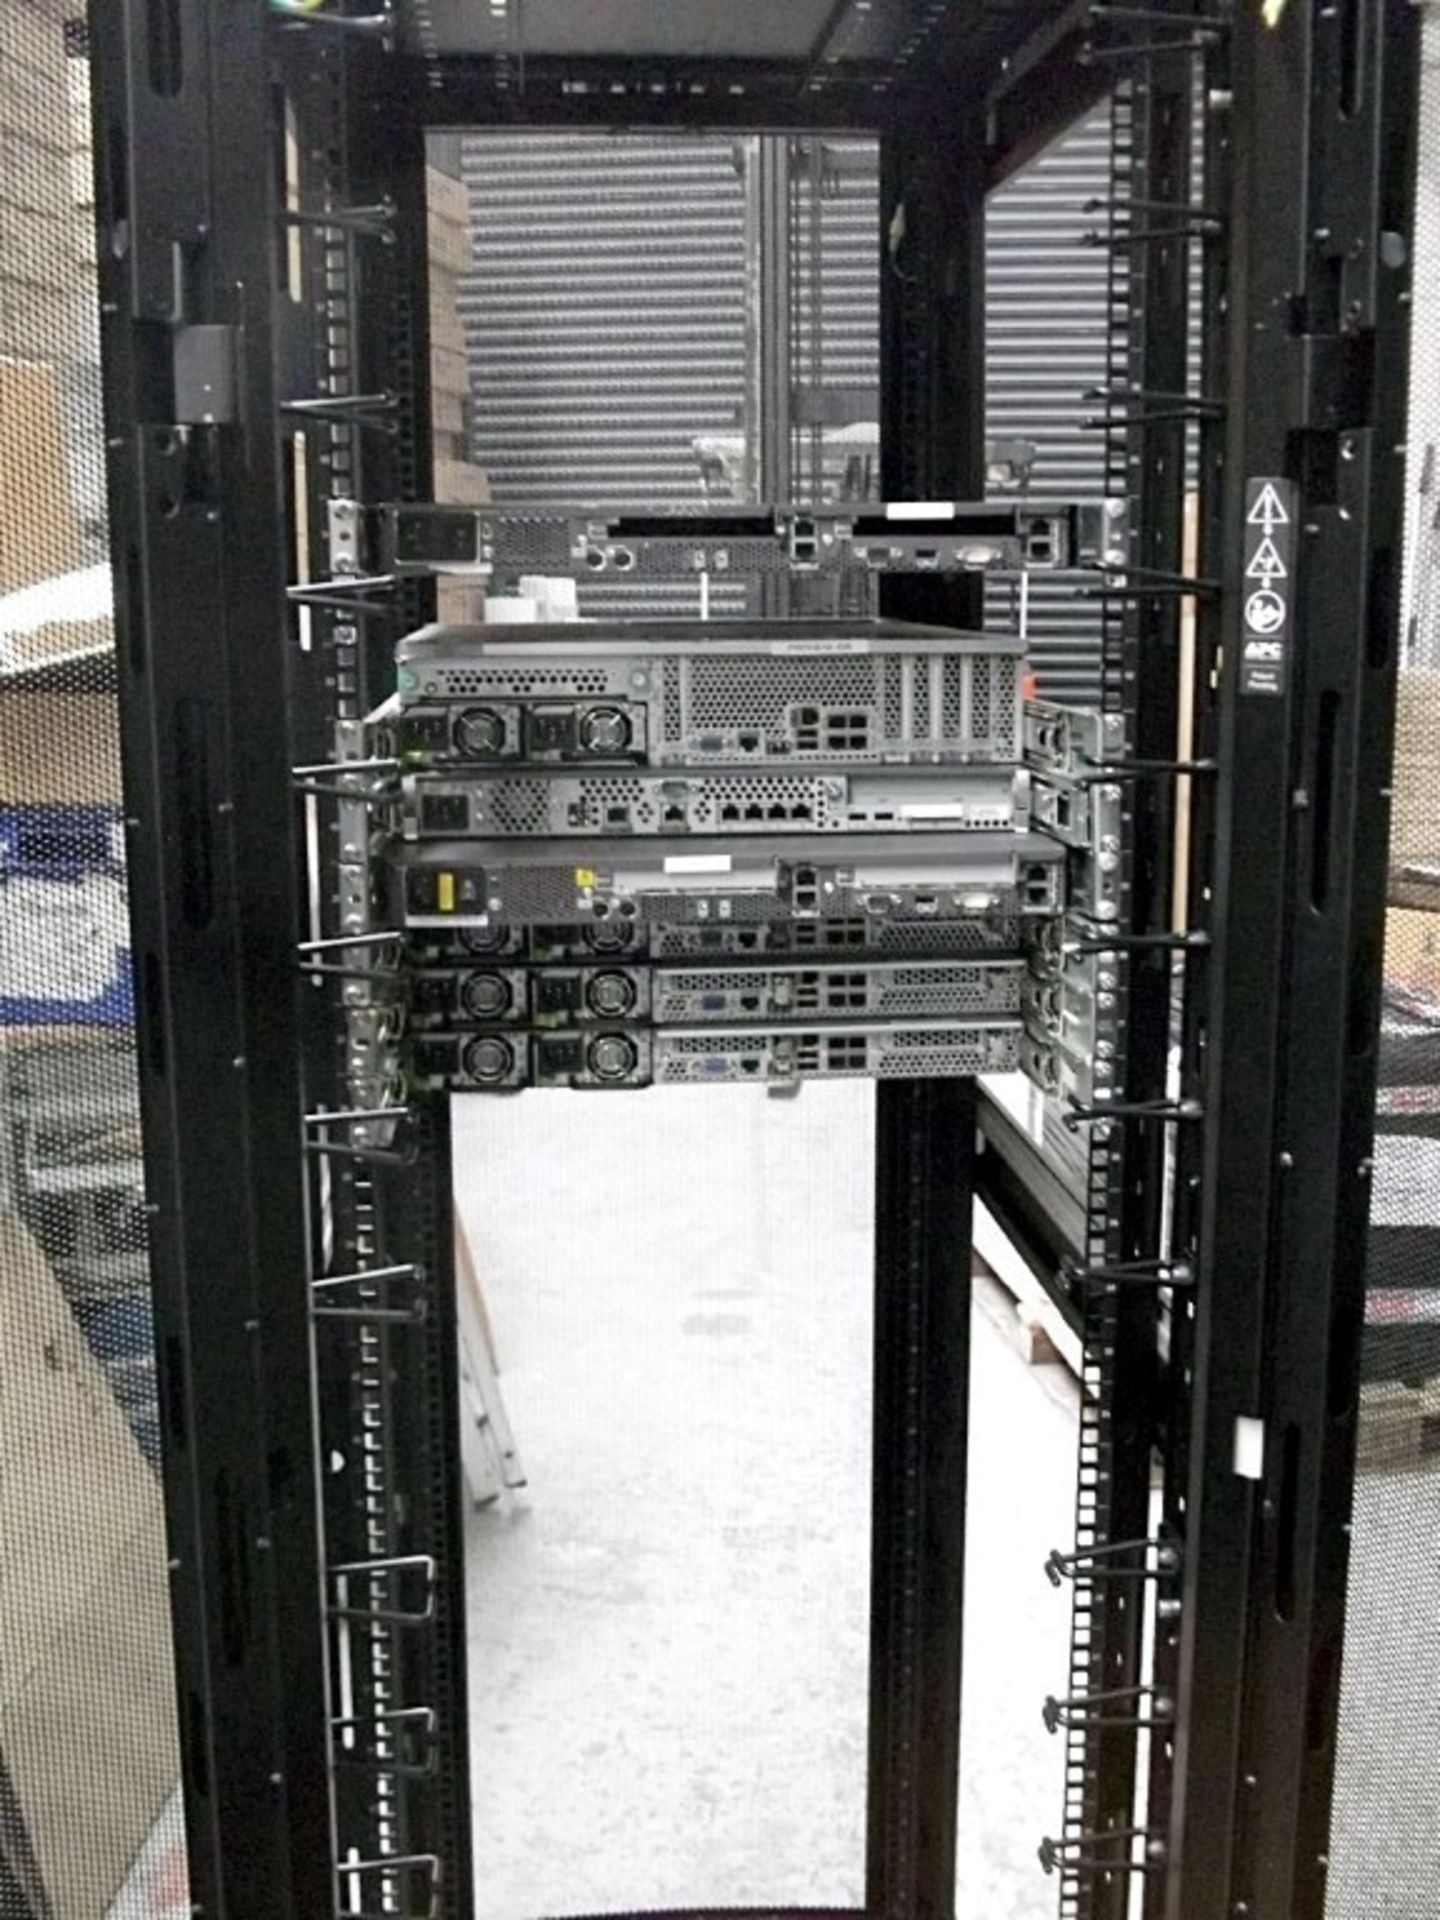 1 x APC Netshelter Server Rack With 7 x Assorted Sun Fire Servers (V & X-Series) - CL106 - Ref: - Image 3 of 8